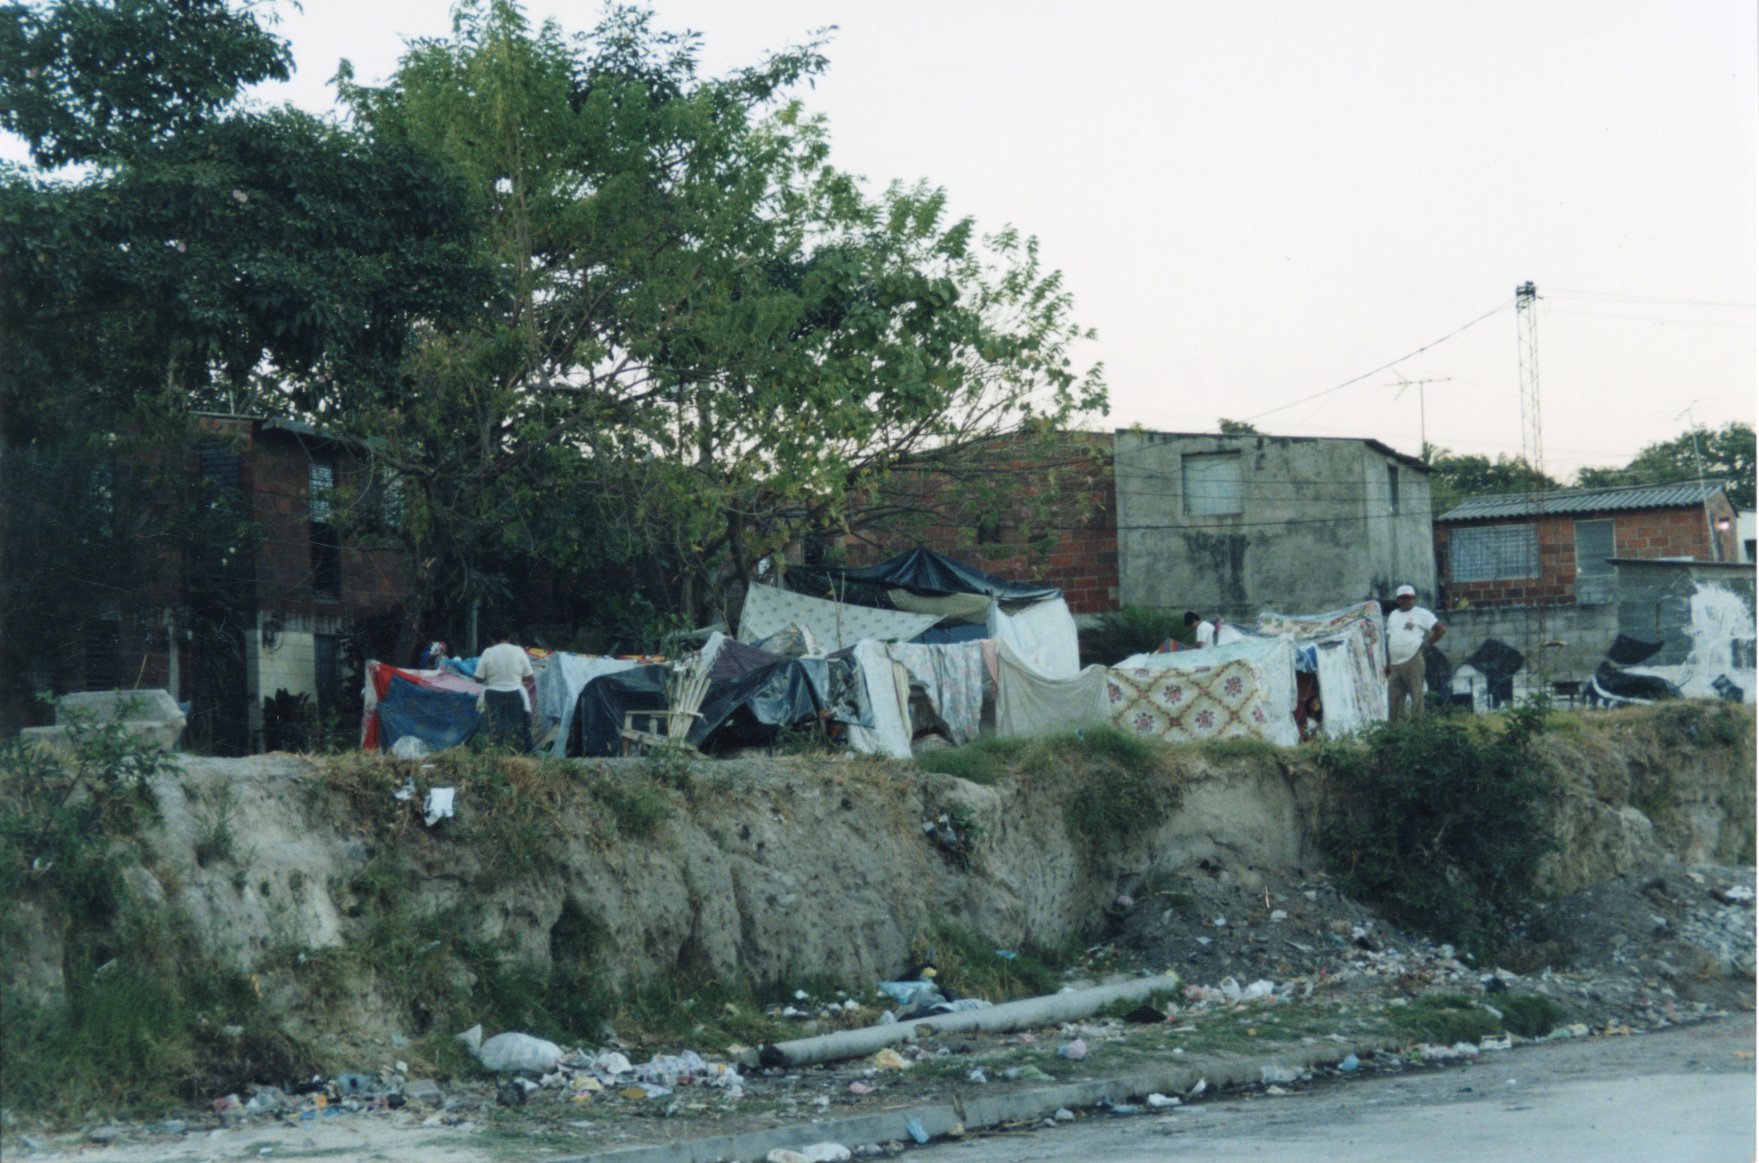 Temporary housing in El Salvador after the 2001 Earthquake, 2001